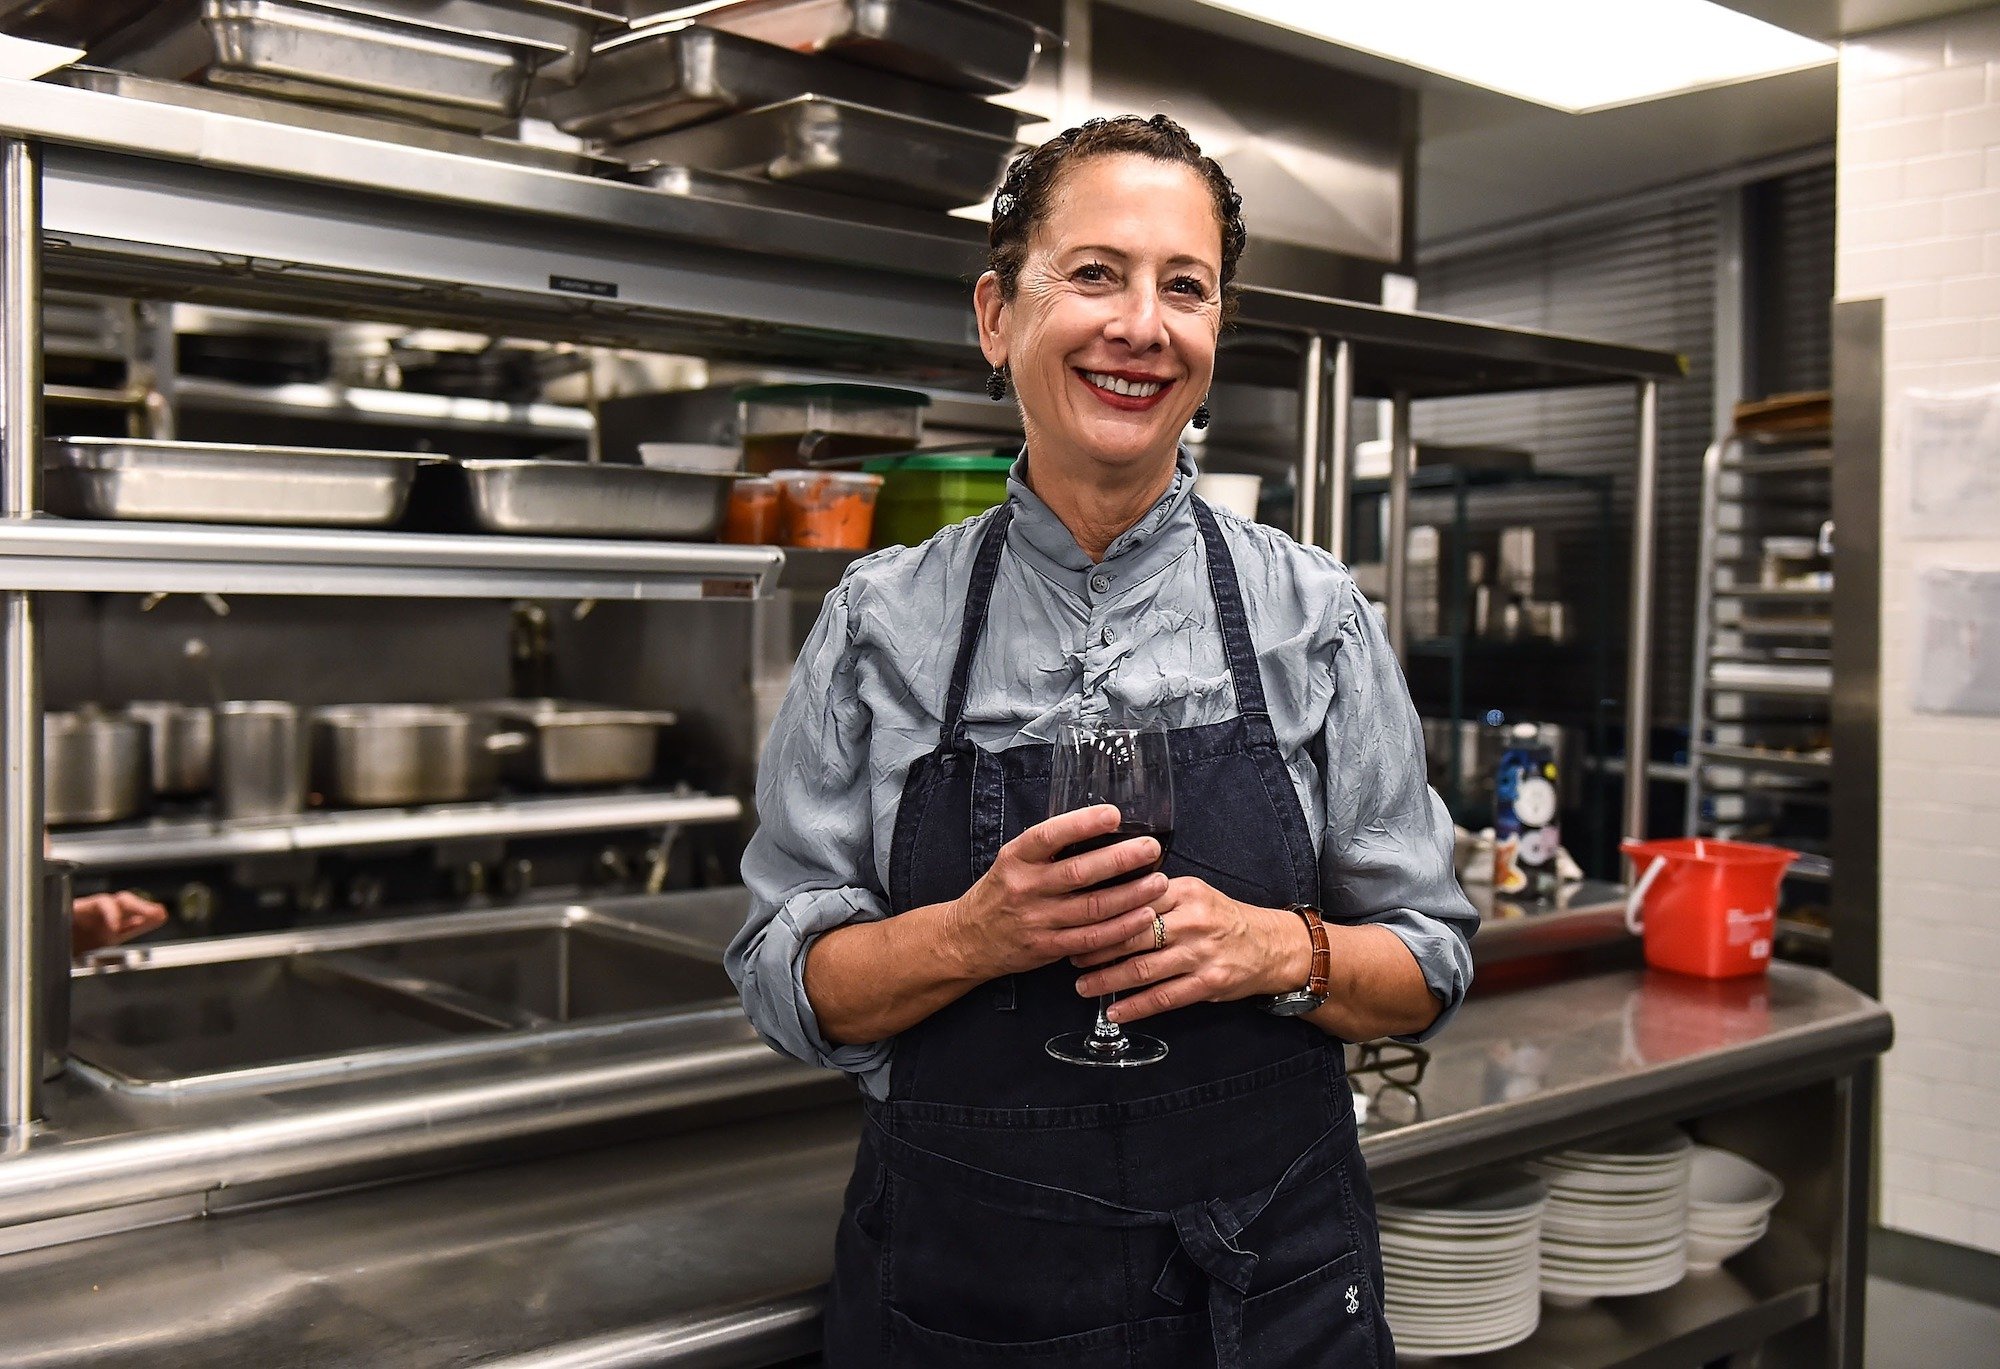 Nancy Silverton Quickly Becomes a Food Network Fan Favorite Thanks to ‘Guy’s Grocery Games’